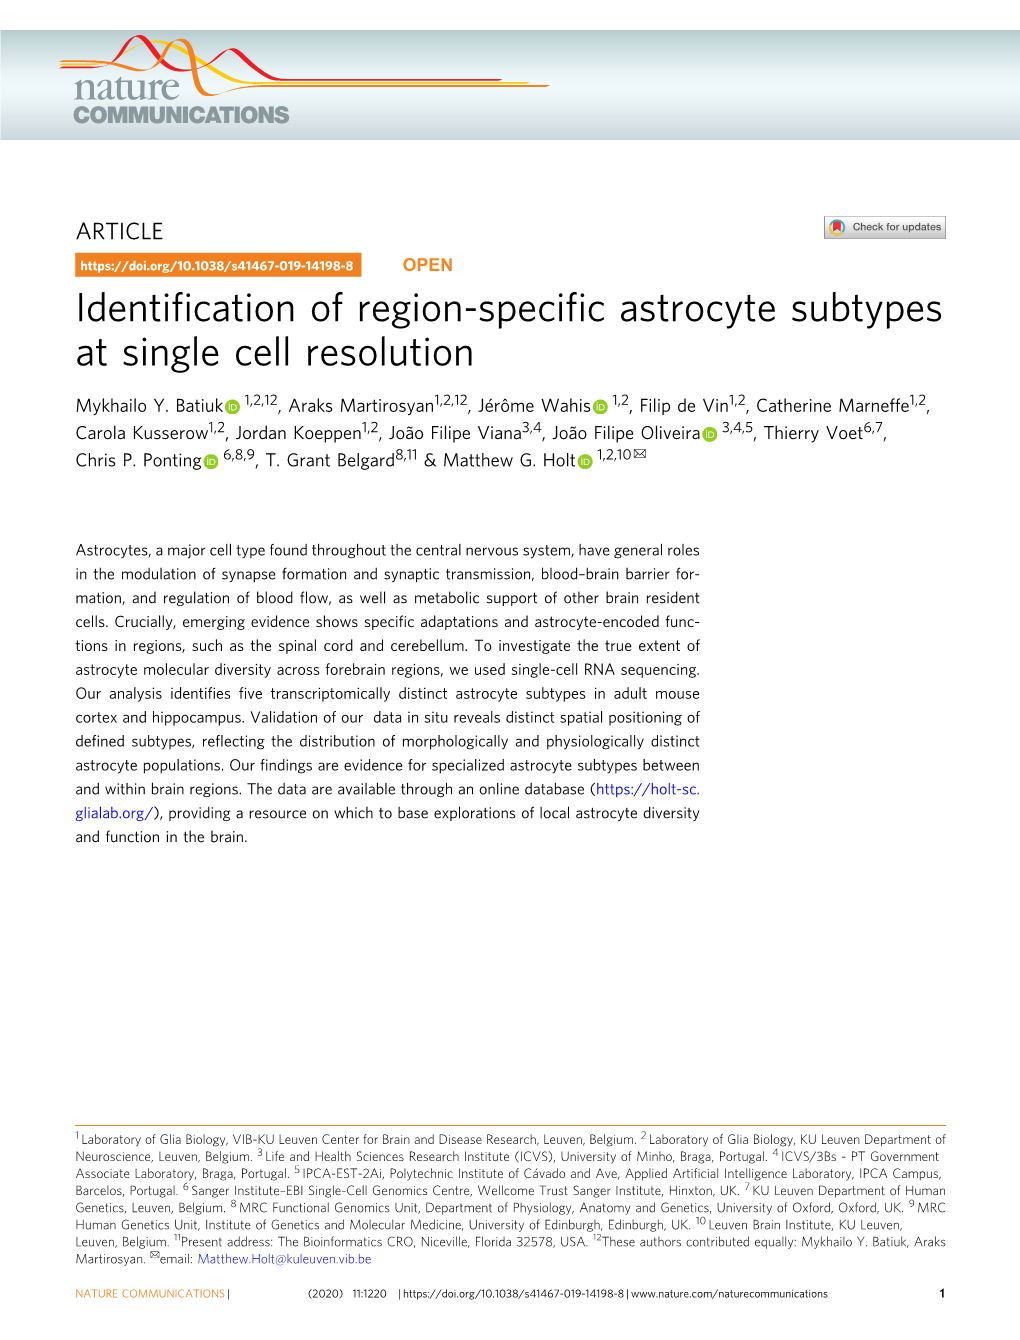 Identification of Region-Specific Astrocyte Subtypes at Single Cell